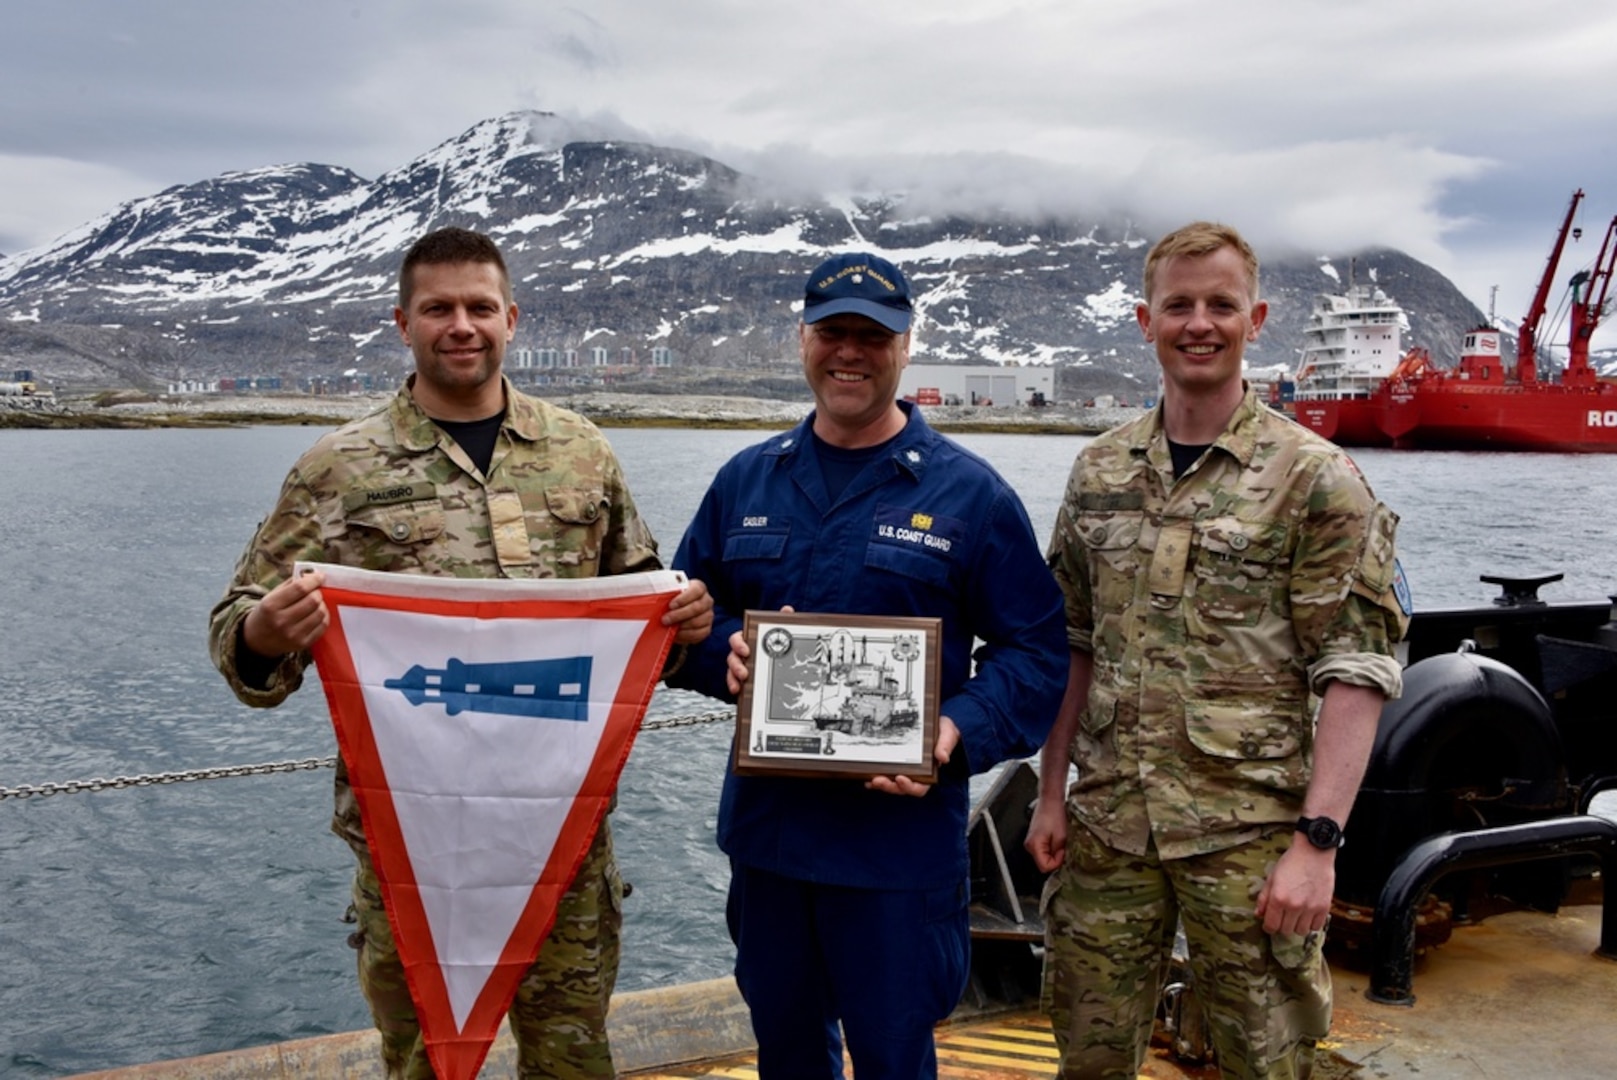 The Coast Guard Cutter Maple hosts an international “Heat and Beat” competition on the buoy deck in Greenland, June 25, 2021. Joint Arctic Command representatives, along with Cmdr. Eric Casler, won the competition with the fastest time and flattest pin. (U.S. Coast Guard photo by Petty Officer 3rd Class Jose Hernandez)